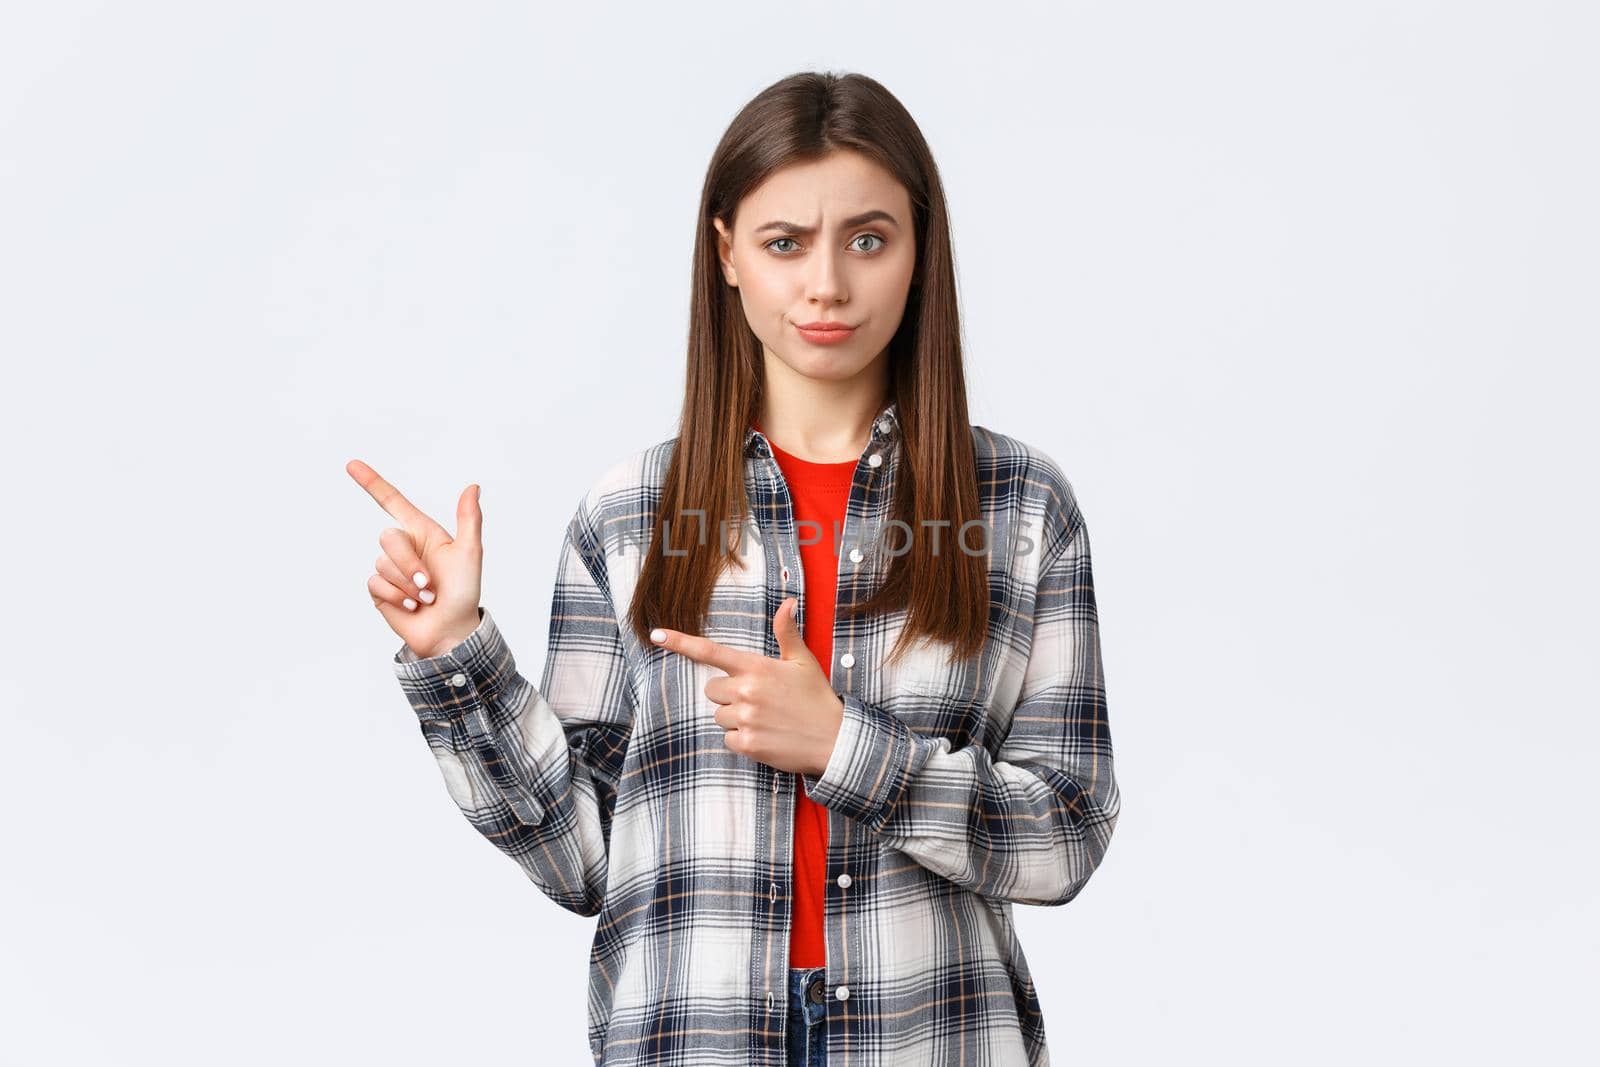 Lifestyle, different emotions, leisure activities concept. Skeptical and unimpressed girl having suspicious thoughts, express disbelief and skepticism, pointing fingers left and smirk displeased.